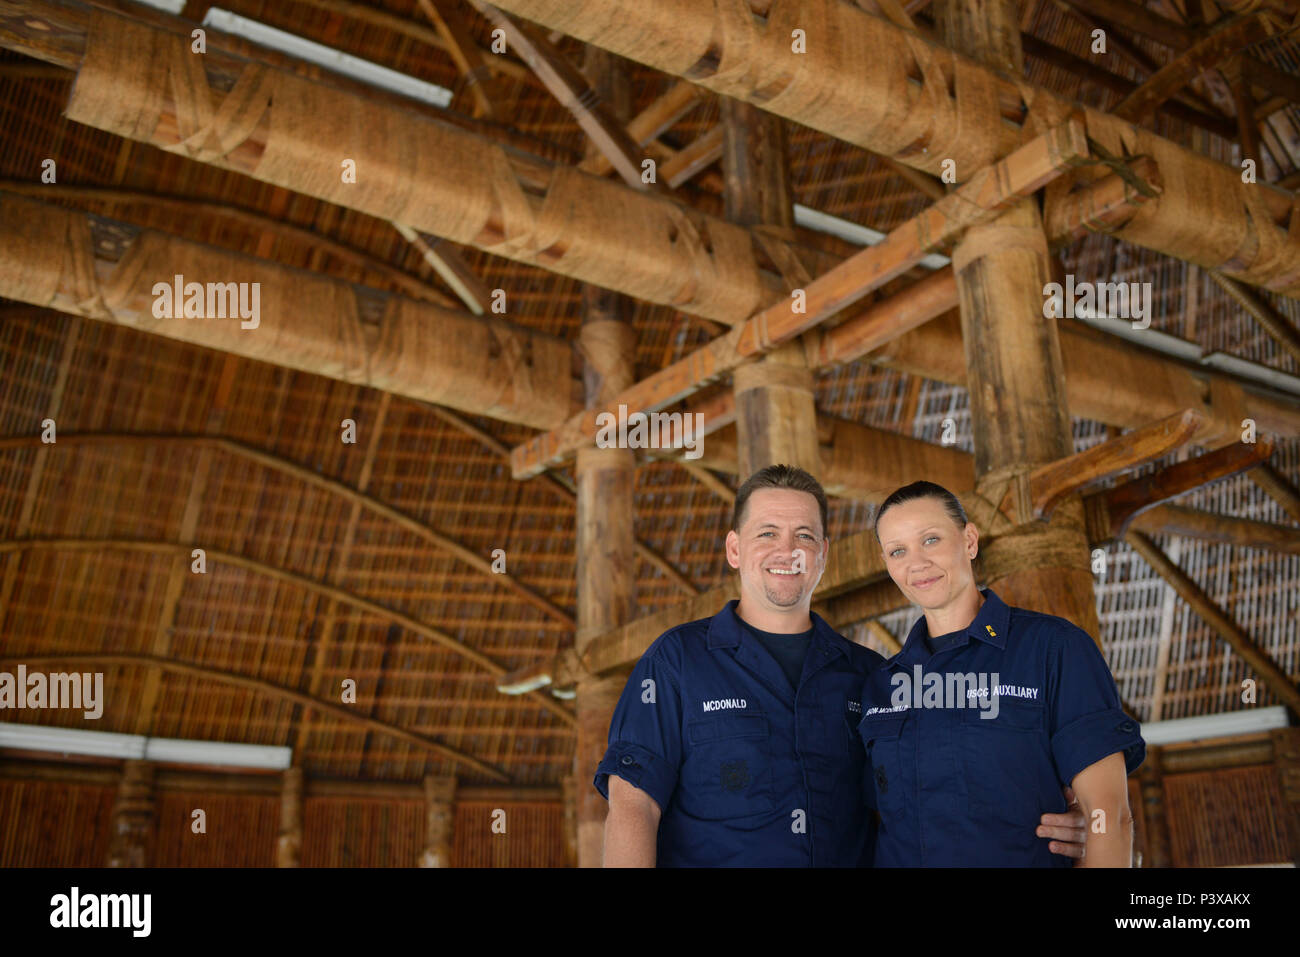 U.S. Coast Guard Auxiliarists Mike and Paula McDonald stand in a ‘fale’ or a traditional style Samoan house in the village of Utulei, American Samoa, July 21, 2016. The couple owns and operates South Pacific Watersports, a watercraft rental and fitness facility in the village of Utulei and are active members of Coast Guard Auxiliary Flotilla 3-28. (U.S. Coast Guard photo by Petty Officer 2nd Class Tara Molle) Stock Photo